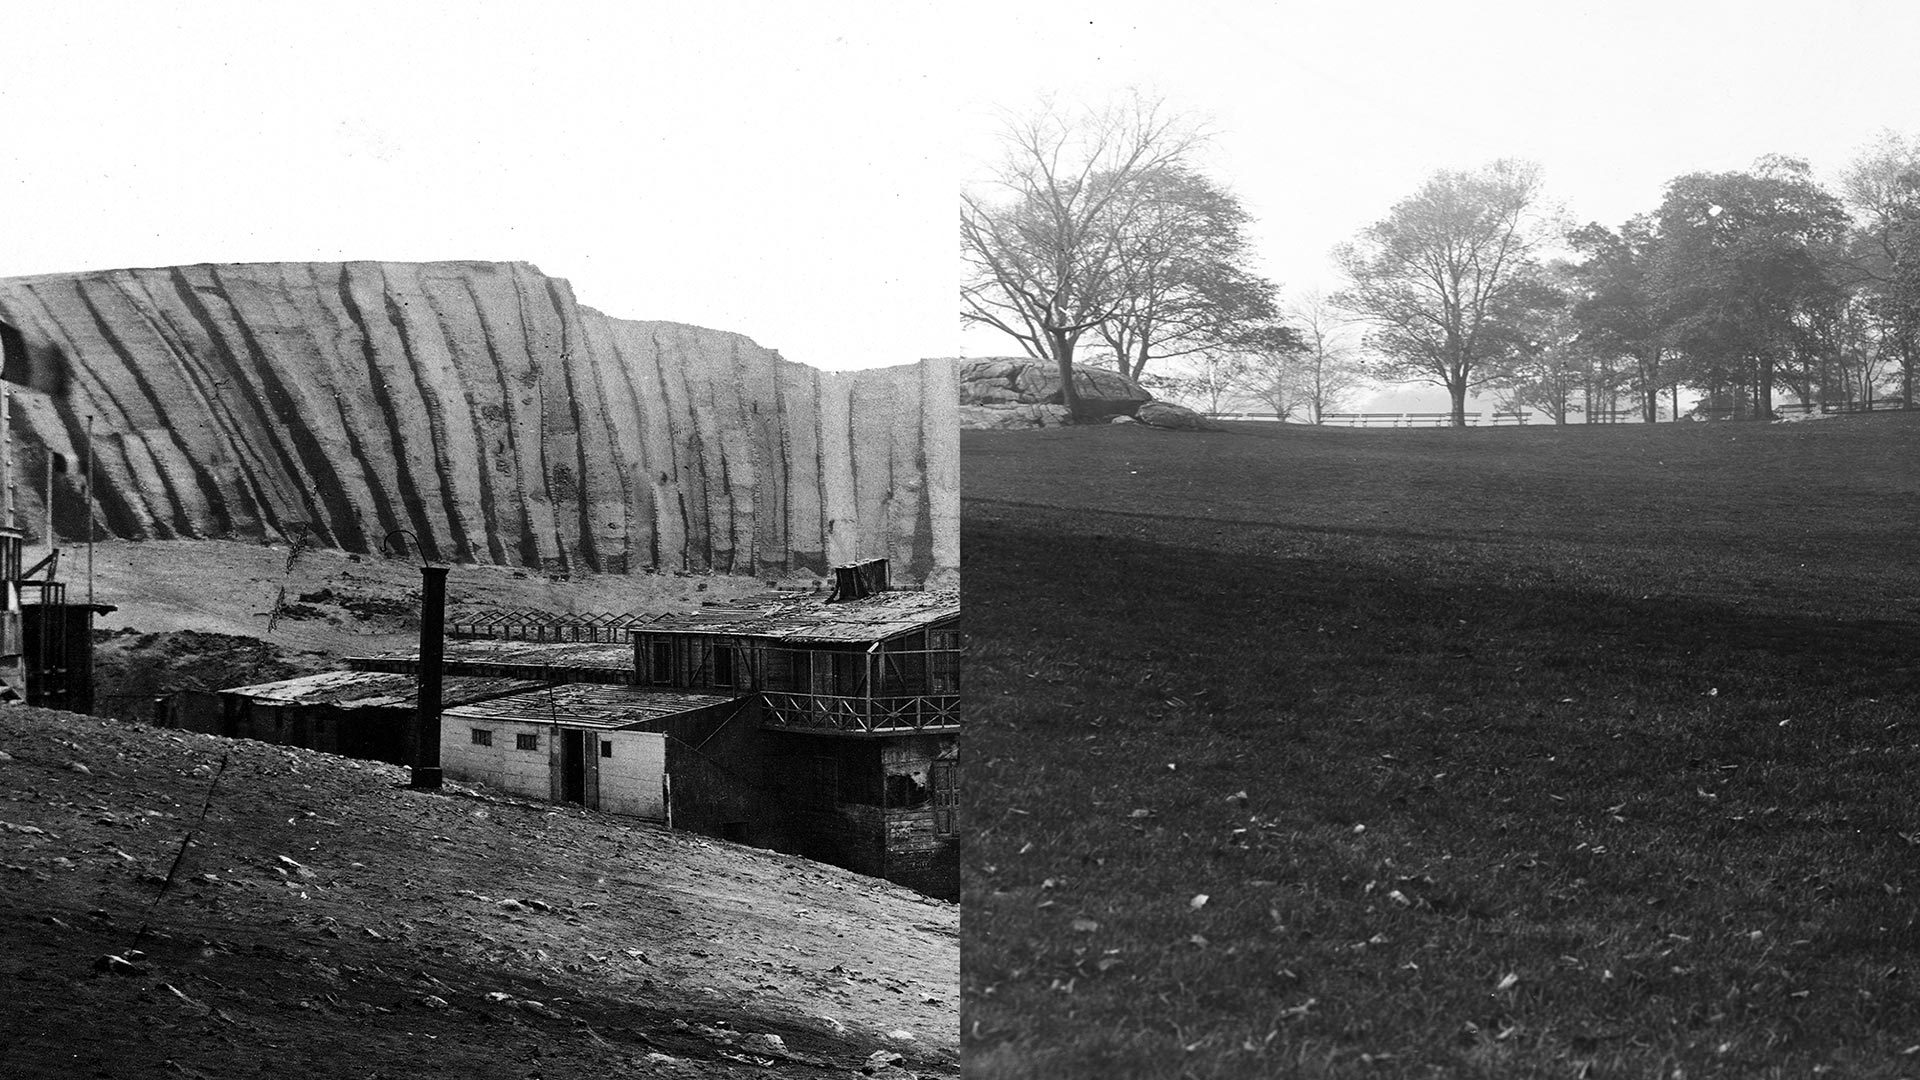 A diptych of two black and white photos in the landscape orientation. The image on the left is of an older industrial building amid a barren landscape. On the right is an archival photograph of a city park.